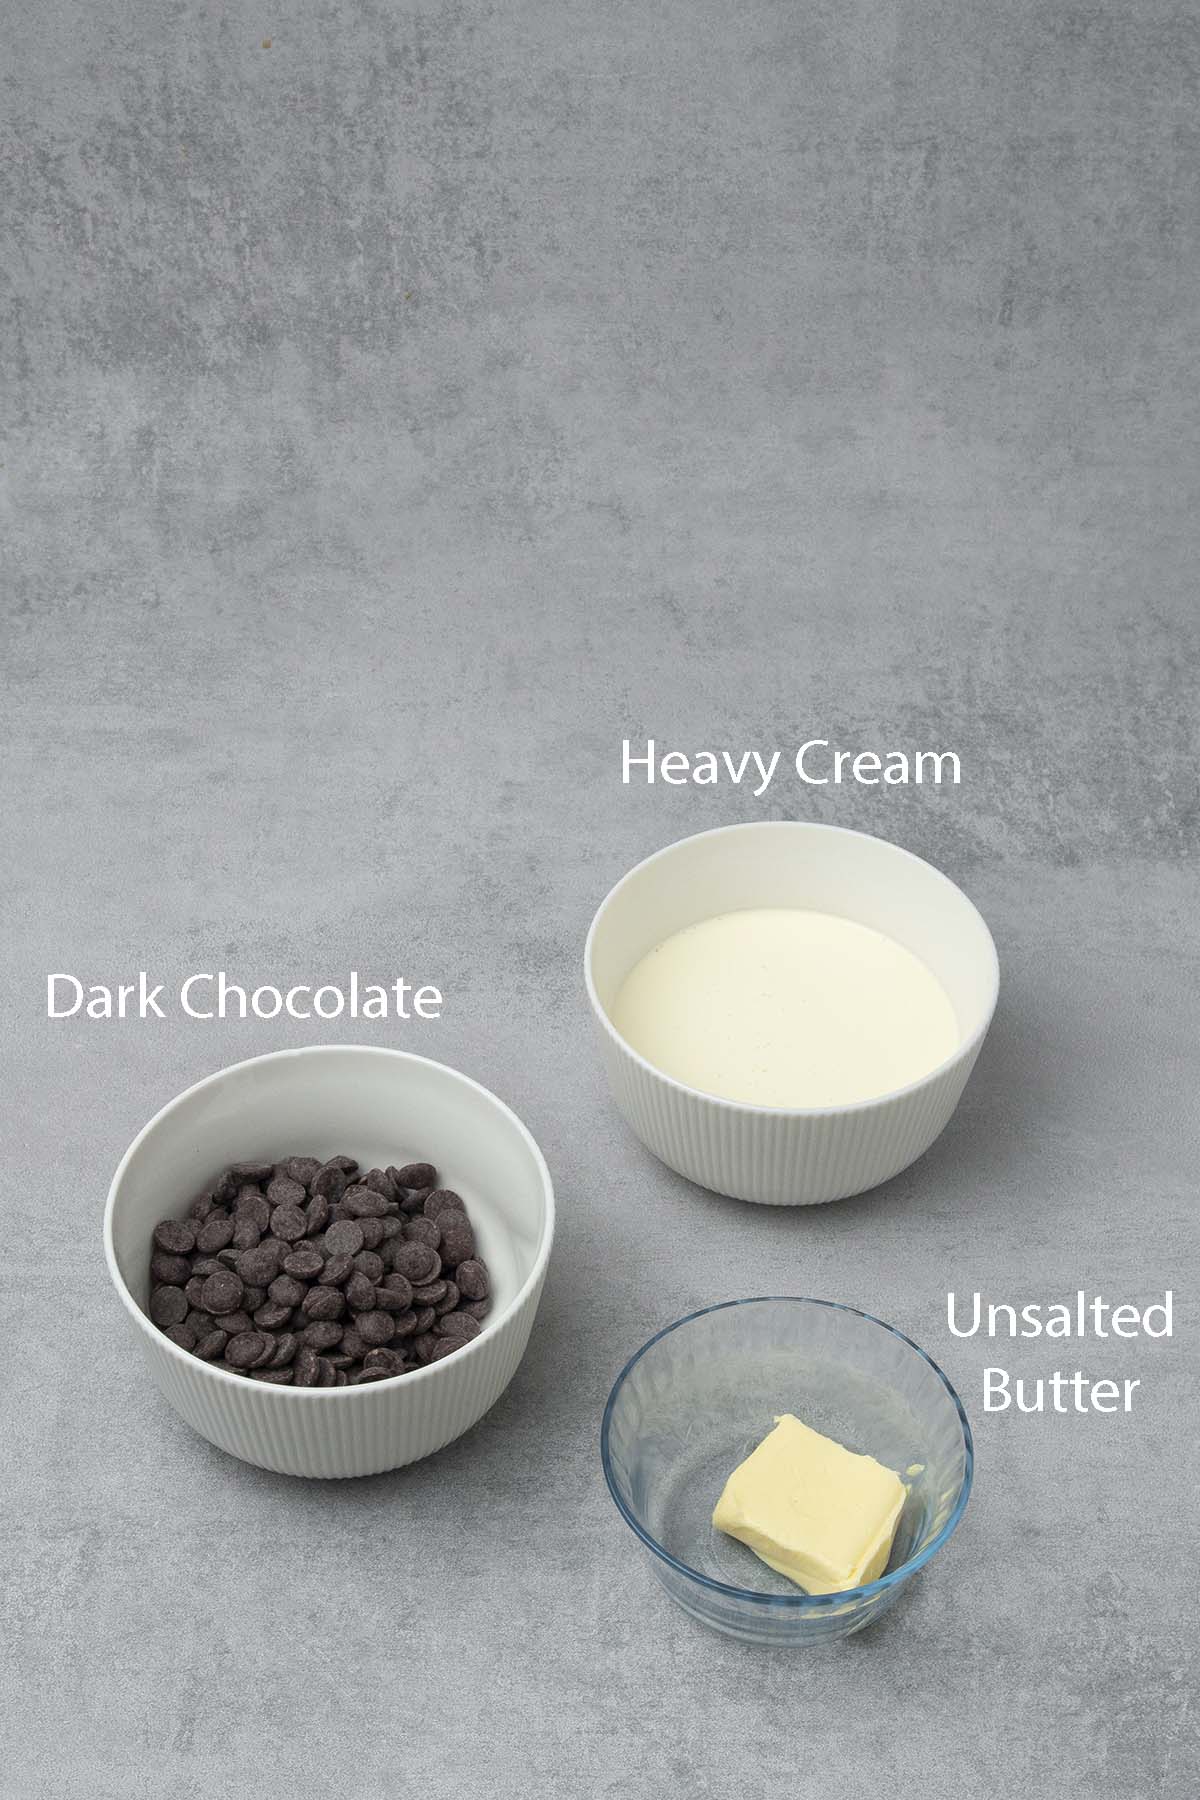 Ingredients for the Chocolate ganache filling